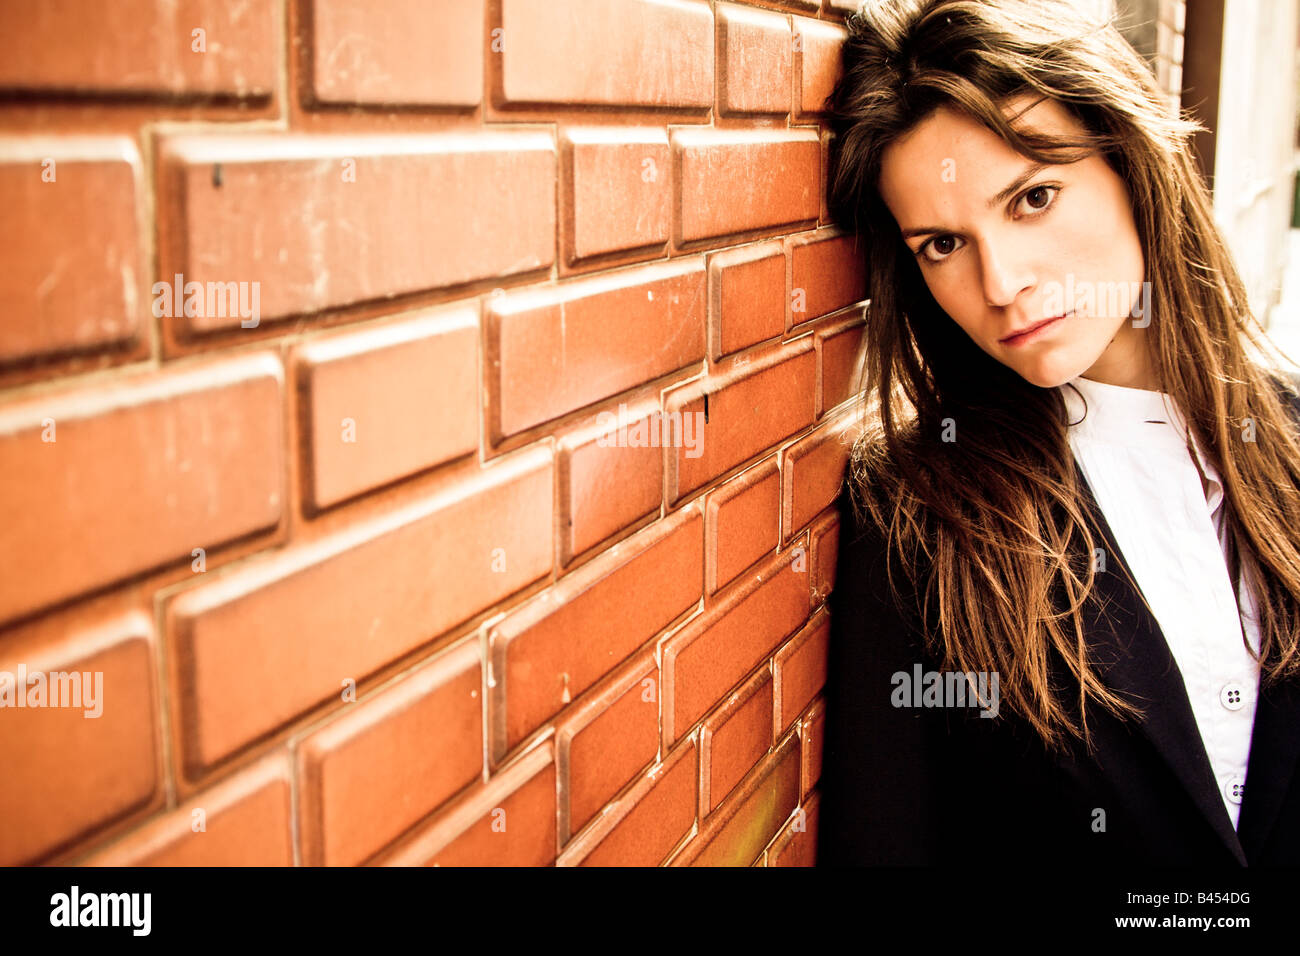 Long haired businesswoman staring at camera Stock Photo